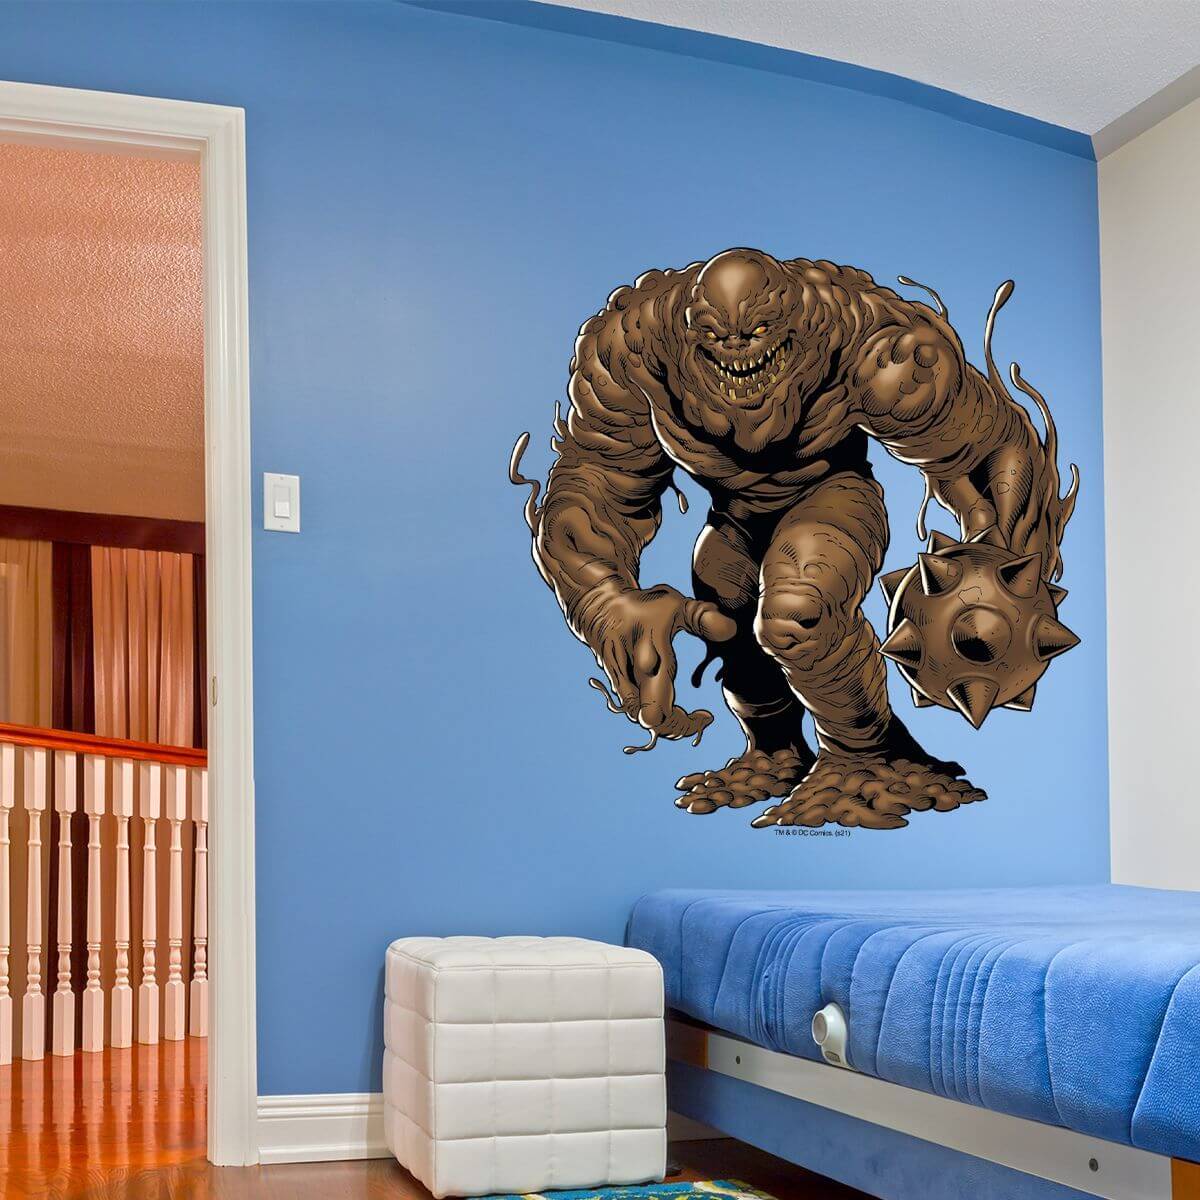 Kismet Decals Clayface Shapeshifter Licensed Wall Sticker - Easy DIY Justice League Home & Room Decor Wall Art - Kismet Decals